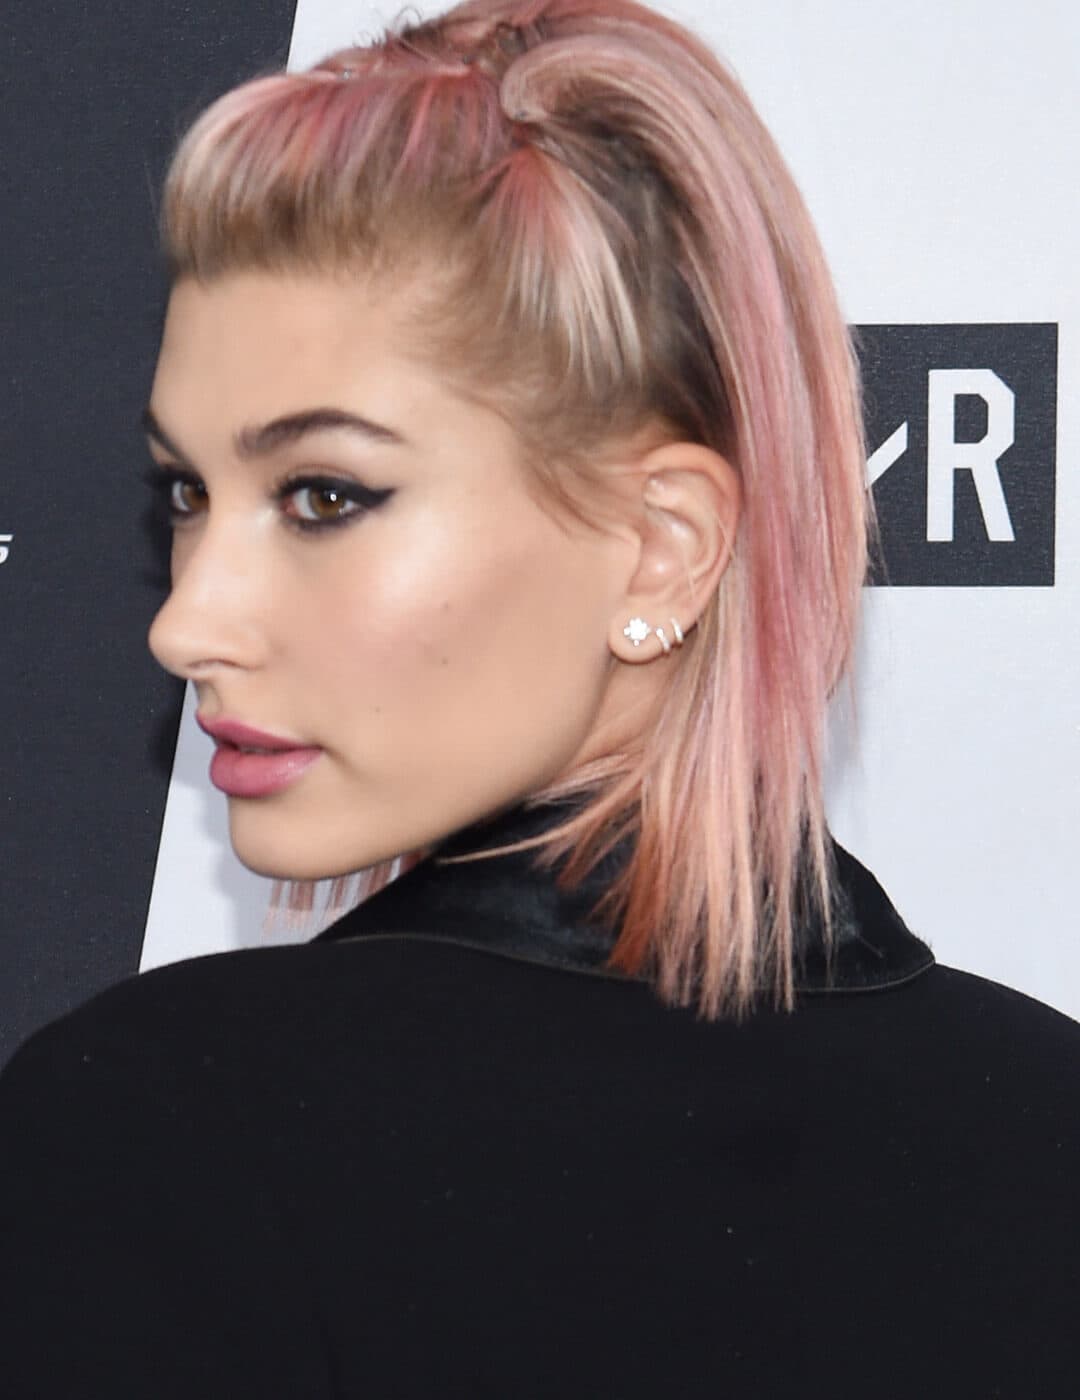 A photo of Hailey Baldwin with bubblegum-pink hair color